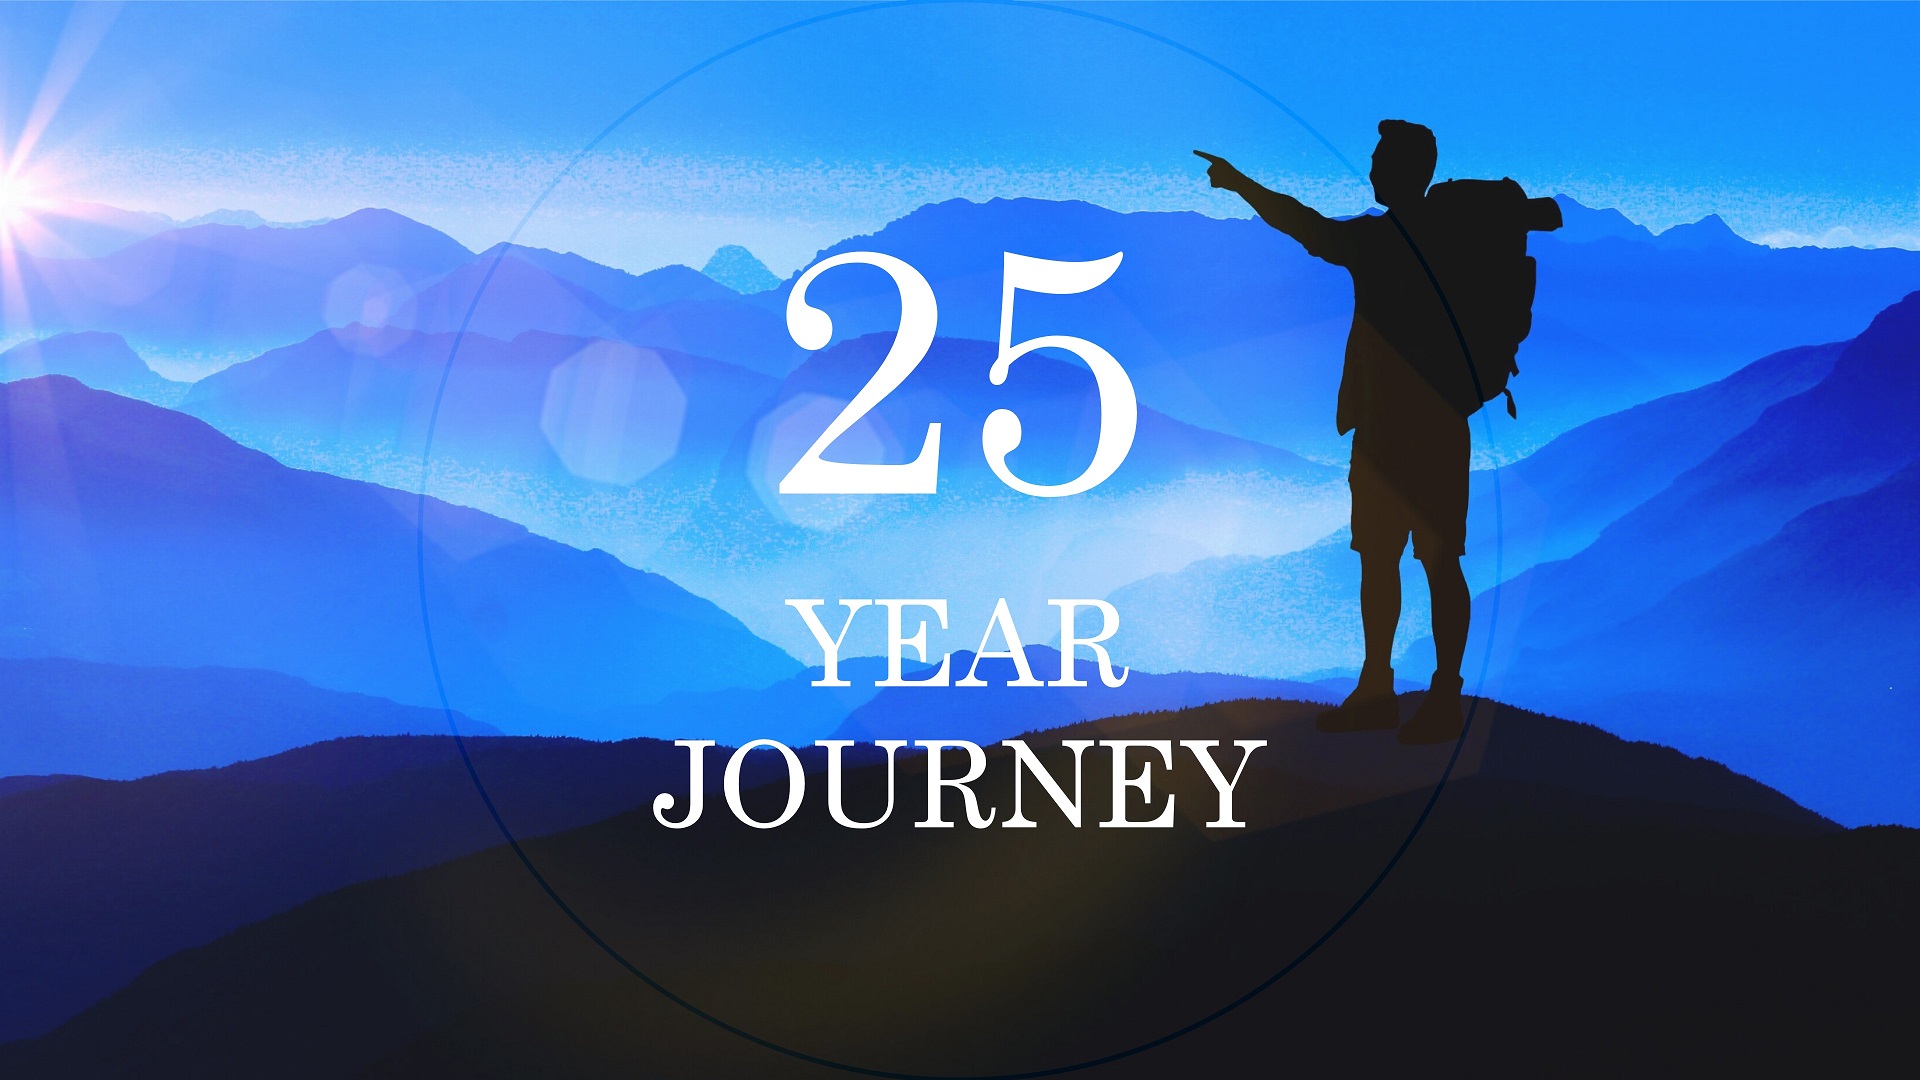 Happy 25th Anniversary, GLAF CONSULTING!